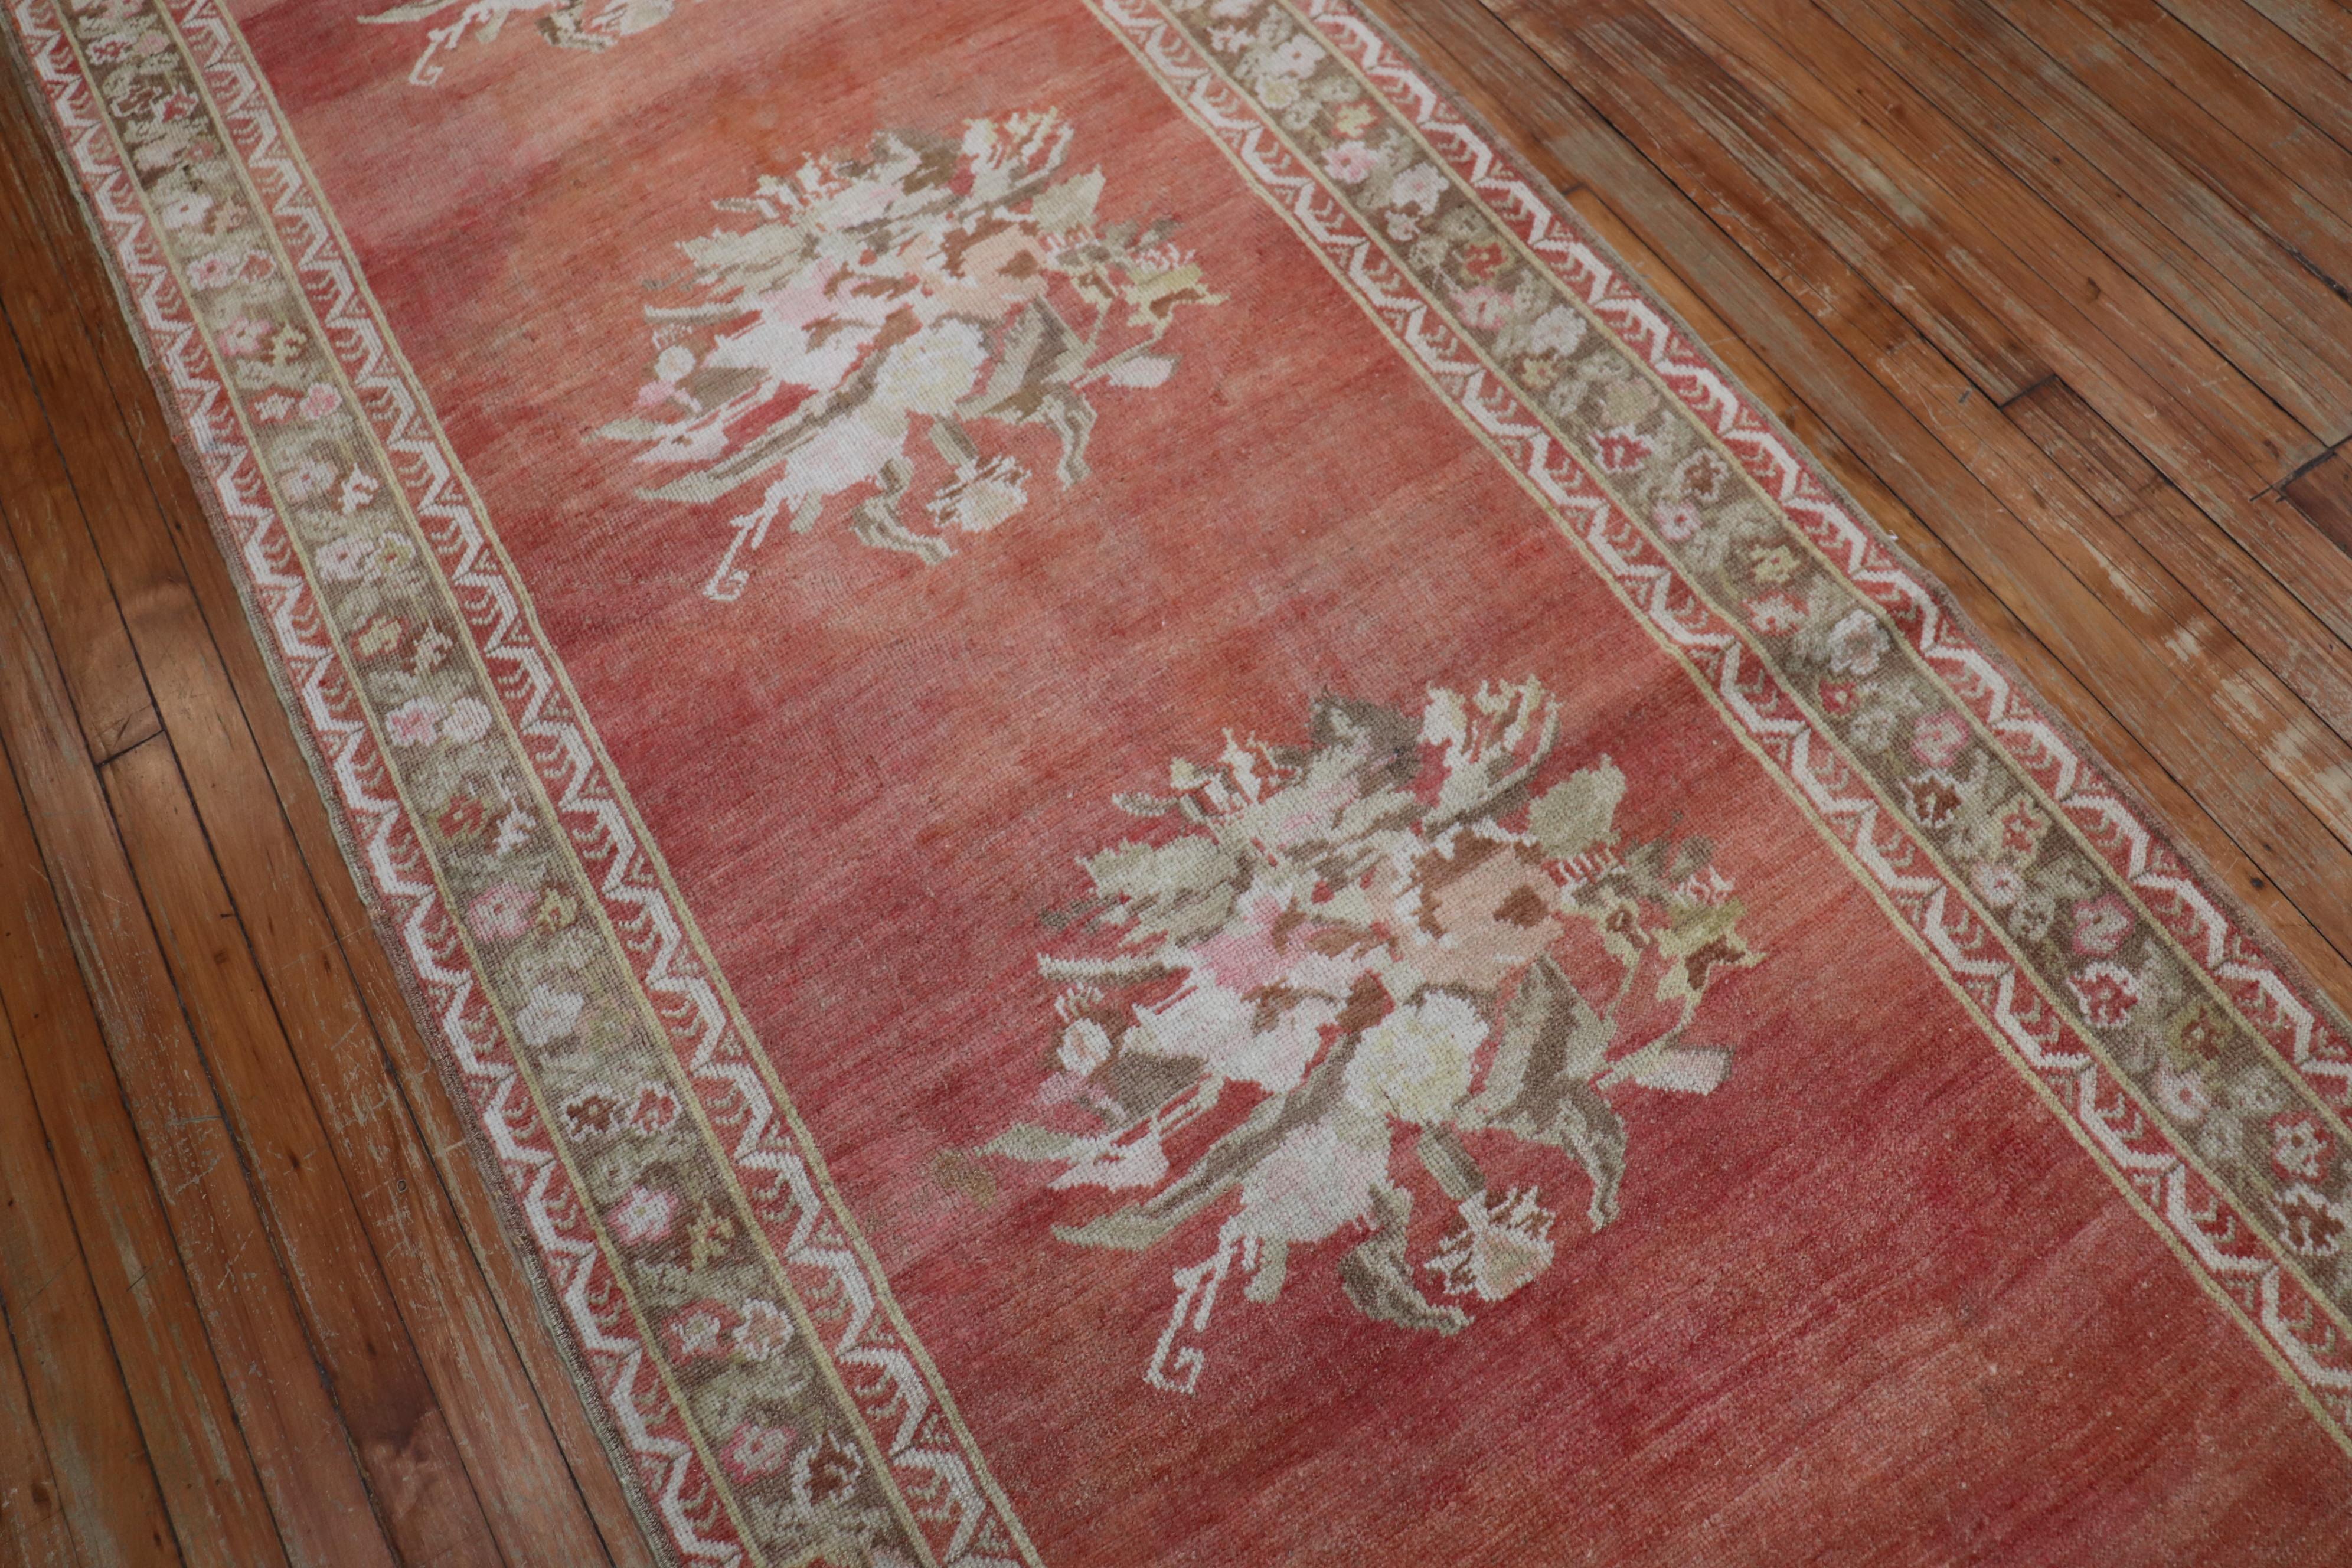 Early 20th century melon red field Turkish Ghiordes runner with an enchanting floral motif 

Measures: 3'5” x 12'9”.